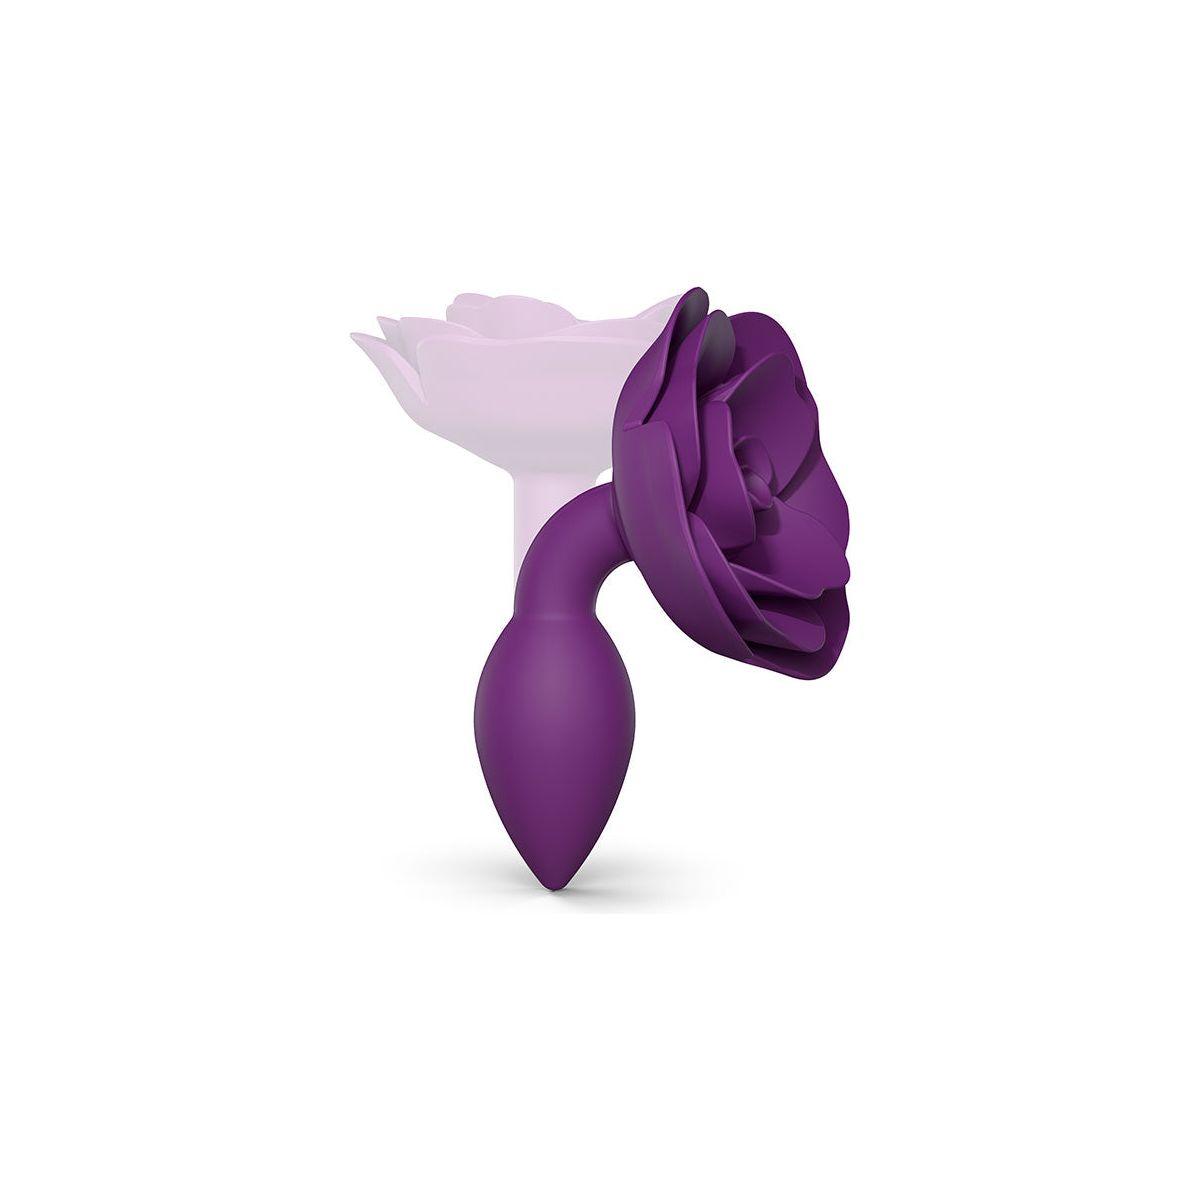 Open Roses by Love to Love Plug Small - Purple Rain - shop enby